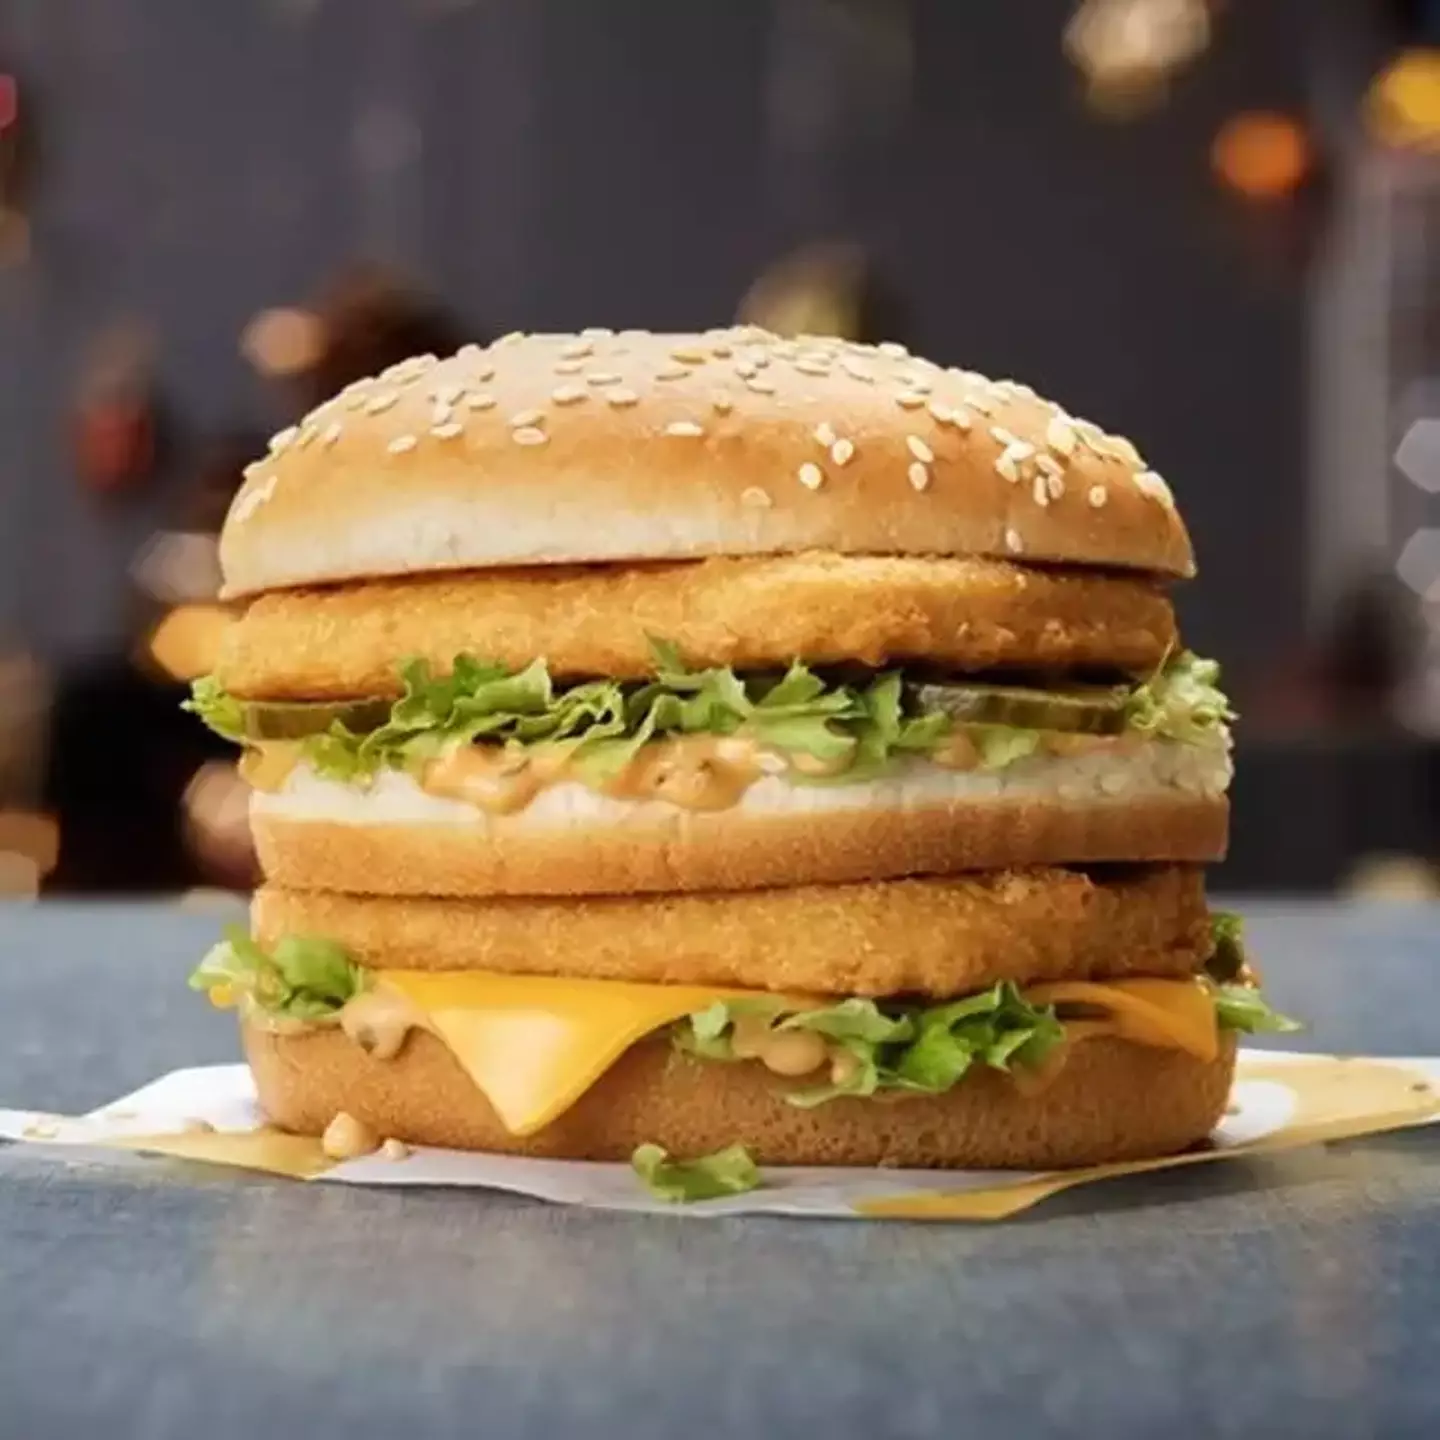 The limited edition Chicken Big Mac.